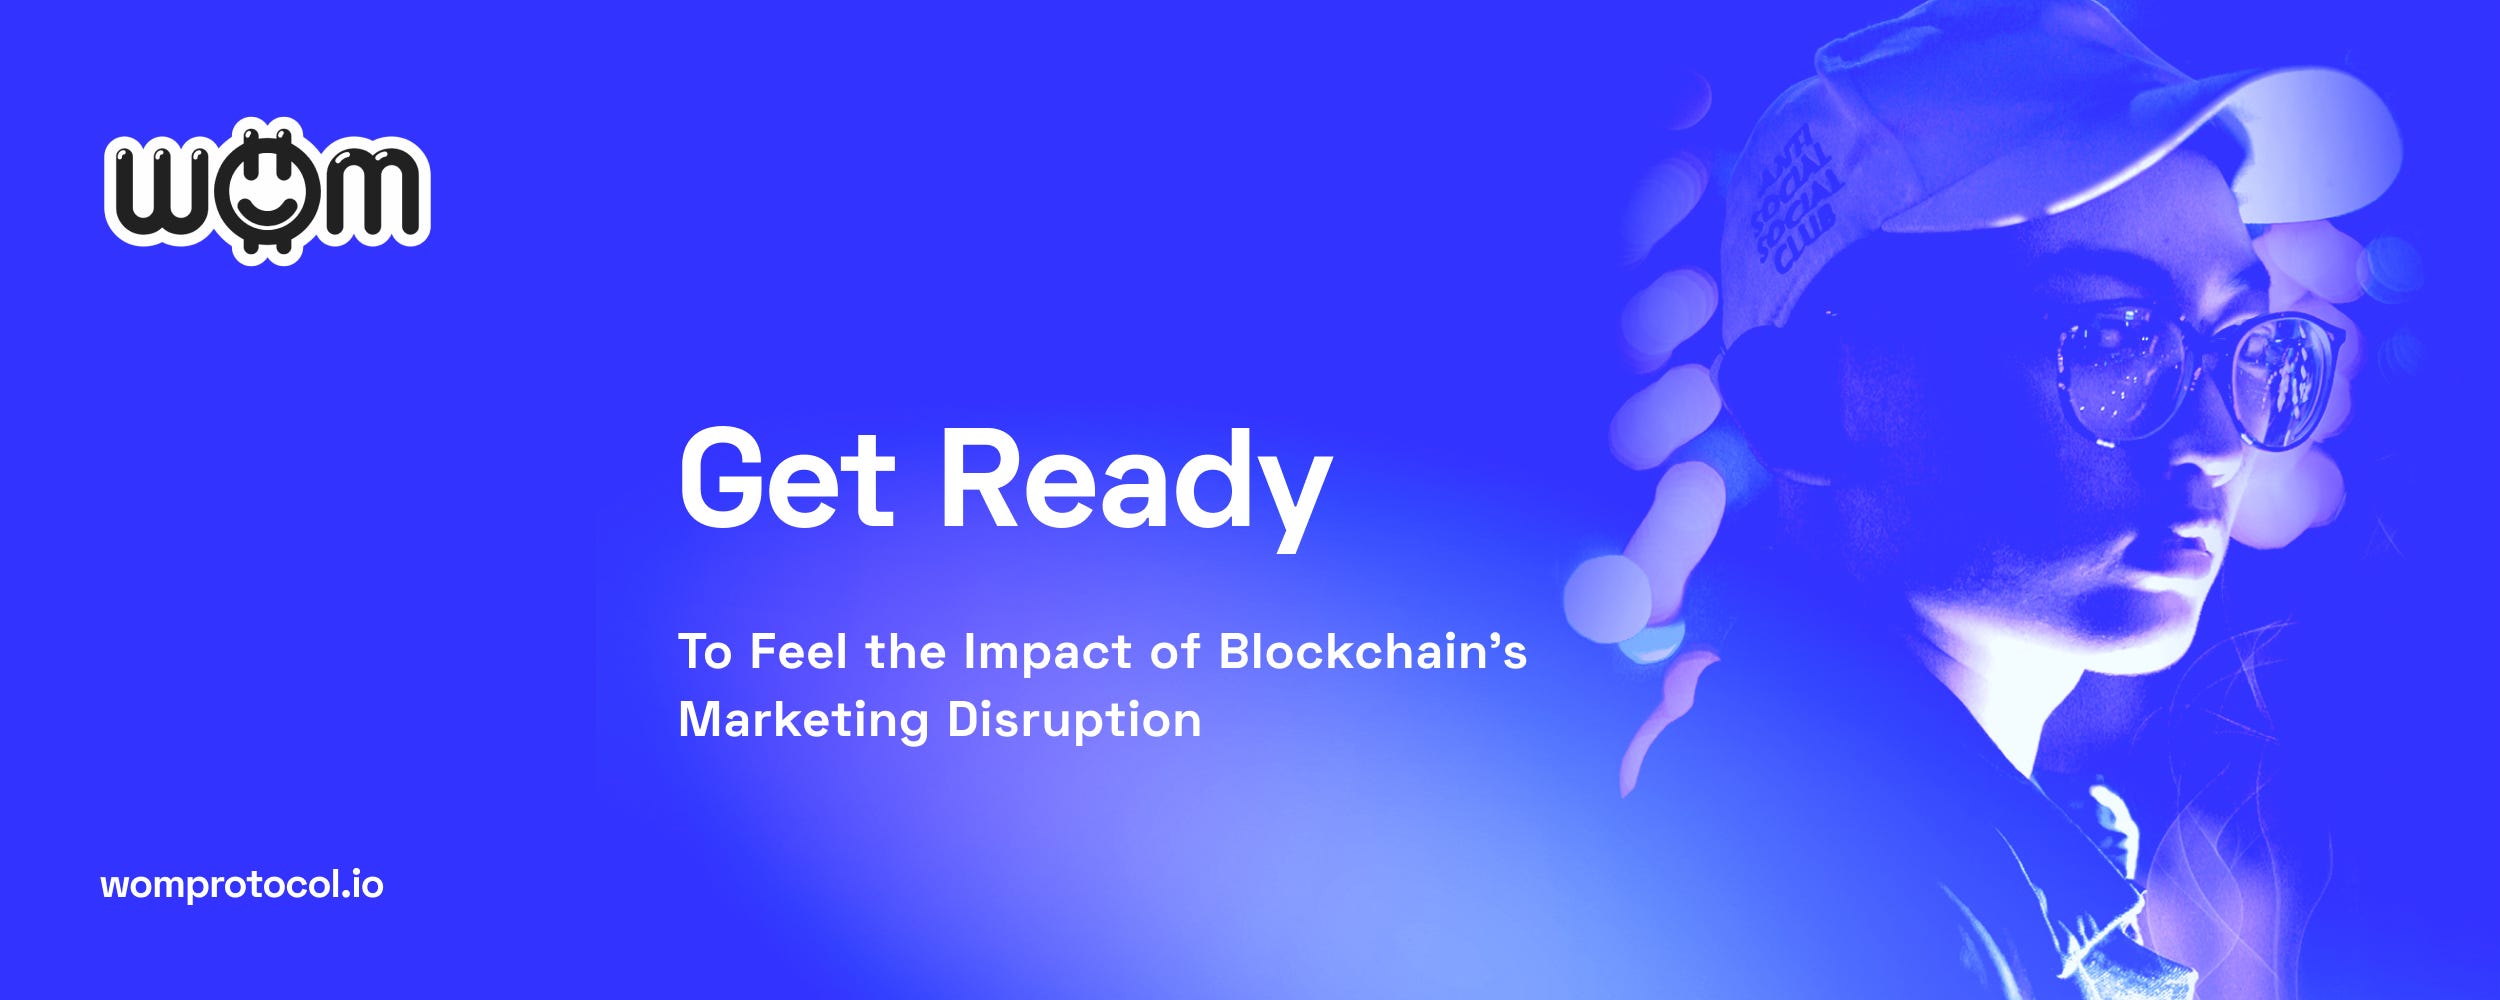 Get Ready To Feel the Impact of Blockchain’s Marketing Disruption